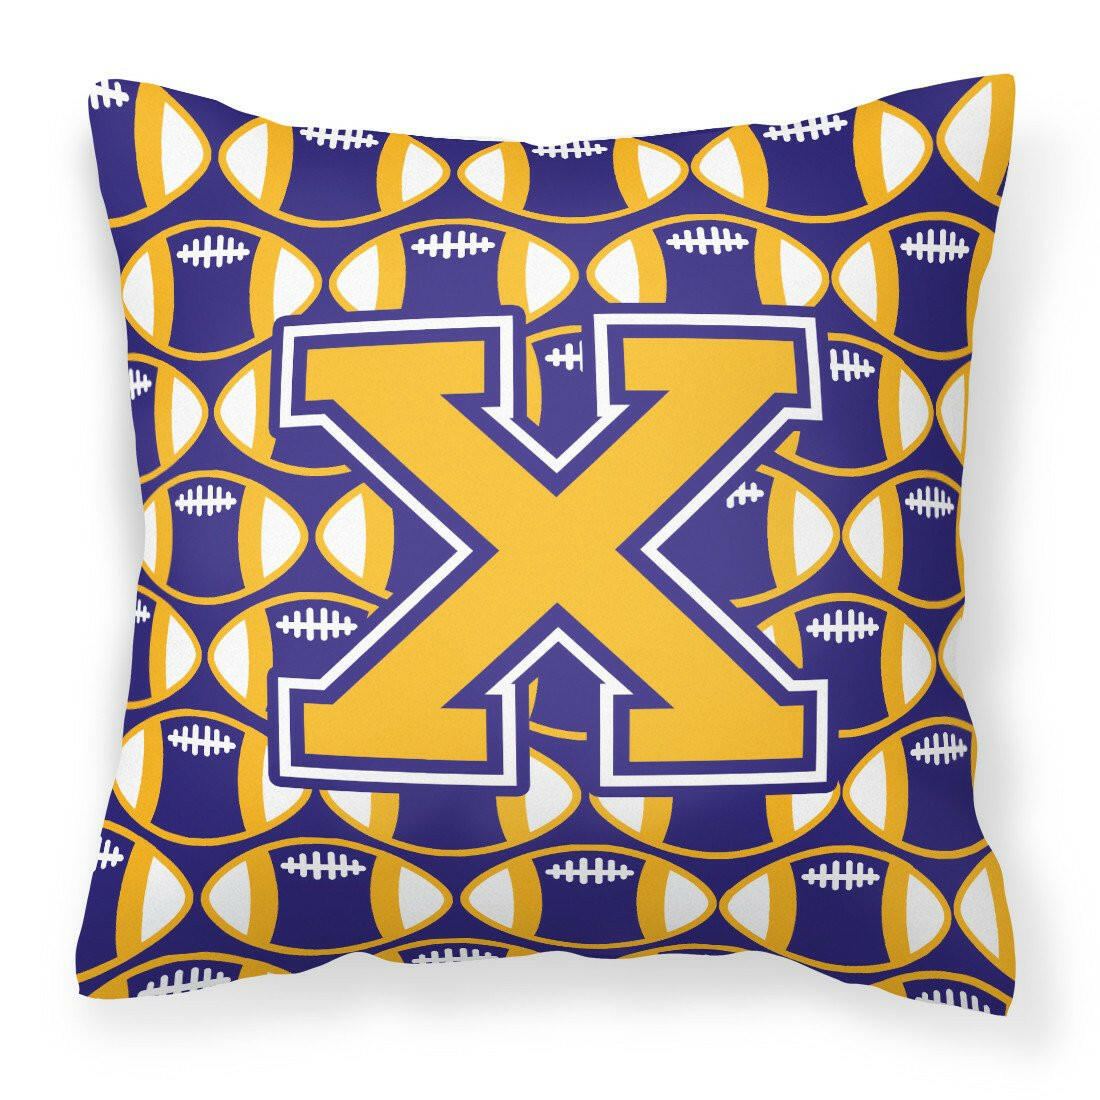 Letter X Football Purple and Gold Fabric Decorative Pillow CJ1064-XPW1414 by Caroline's Treasures